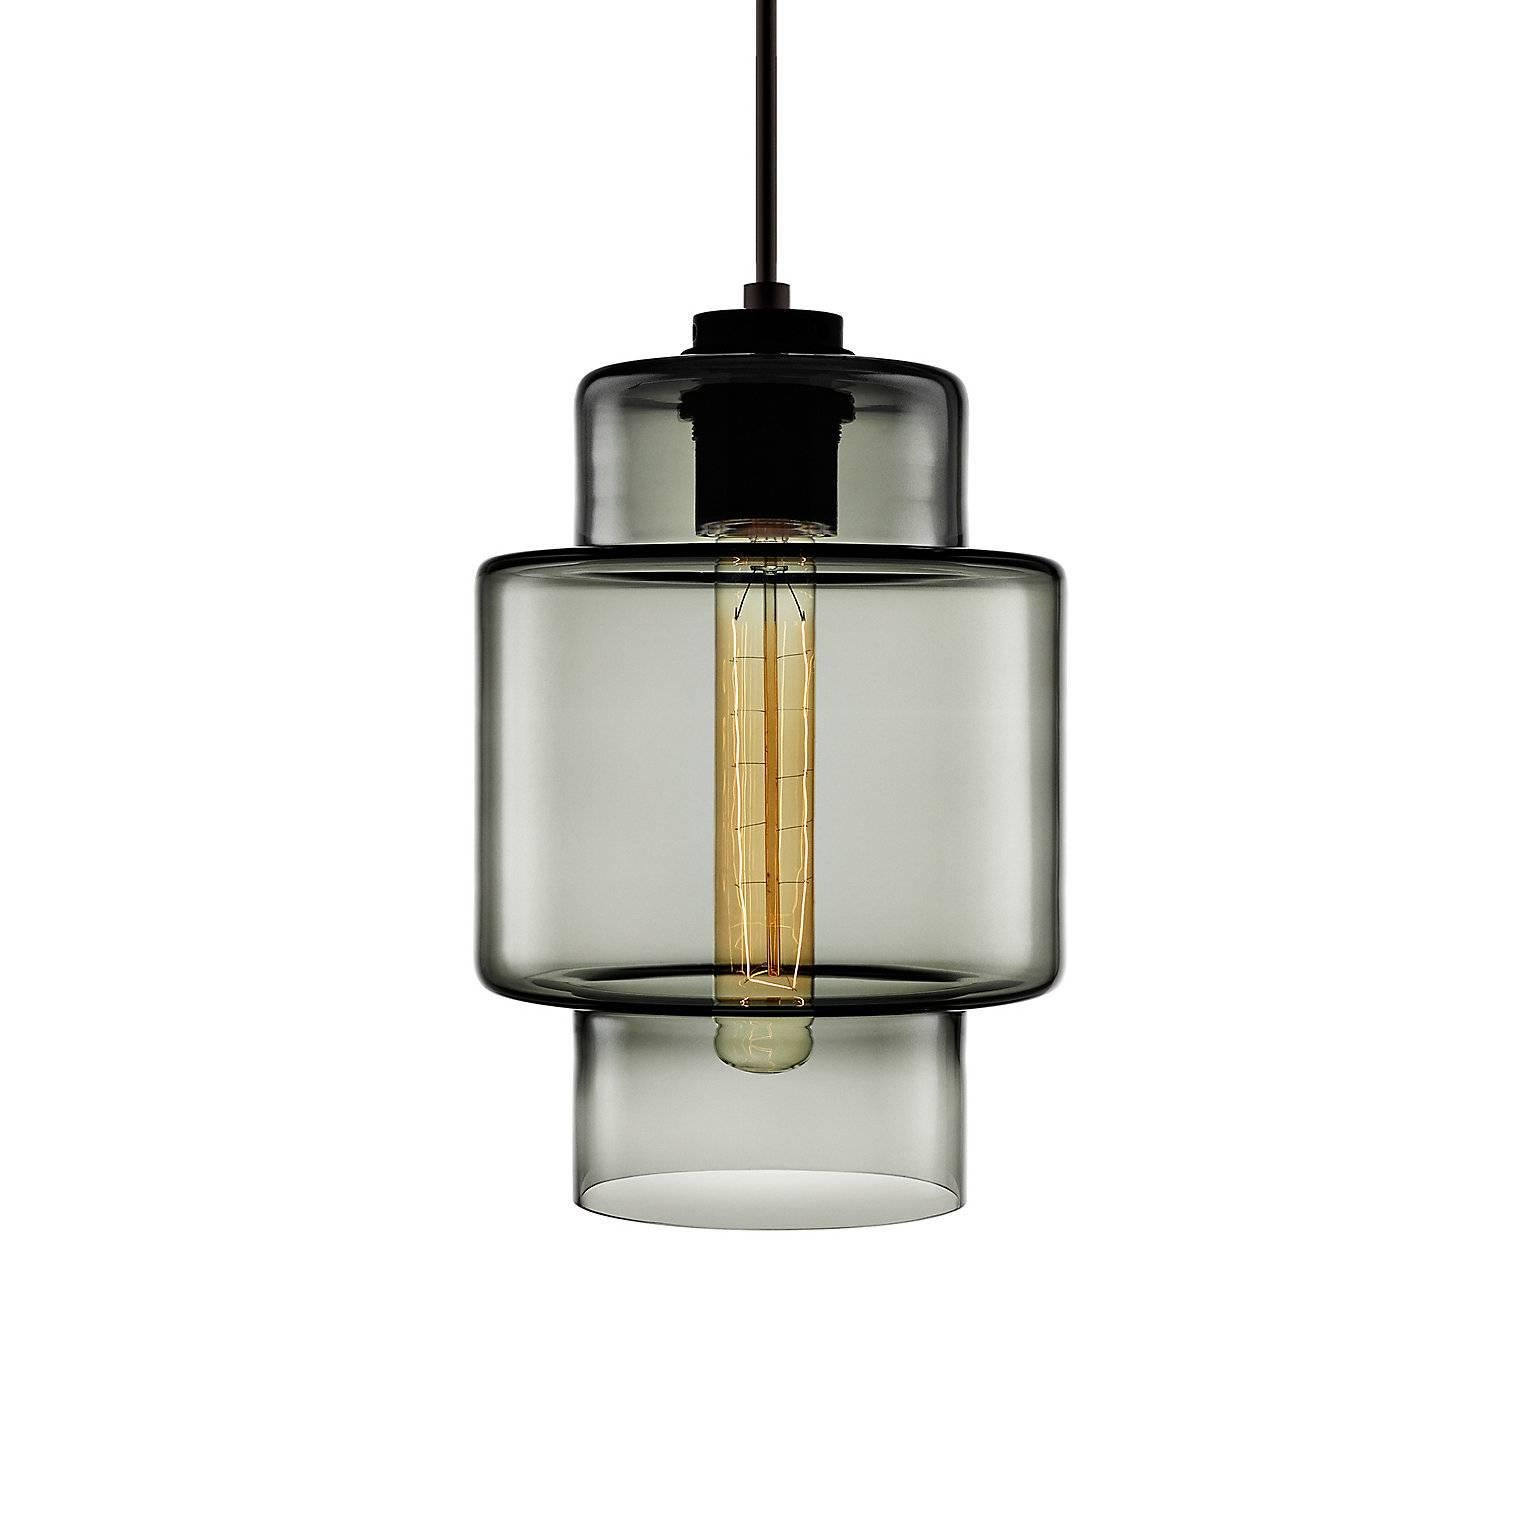 Axia Opaline Handblown Modern Glass Pendant Light, Made in the USA In New Condition For Sale In Beacon, NY